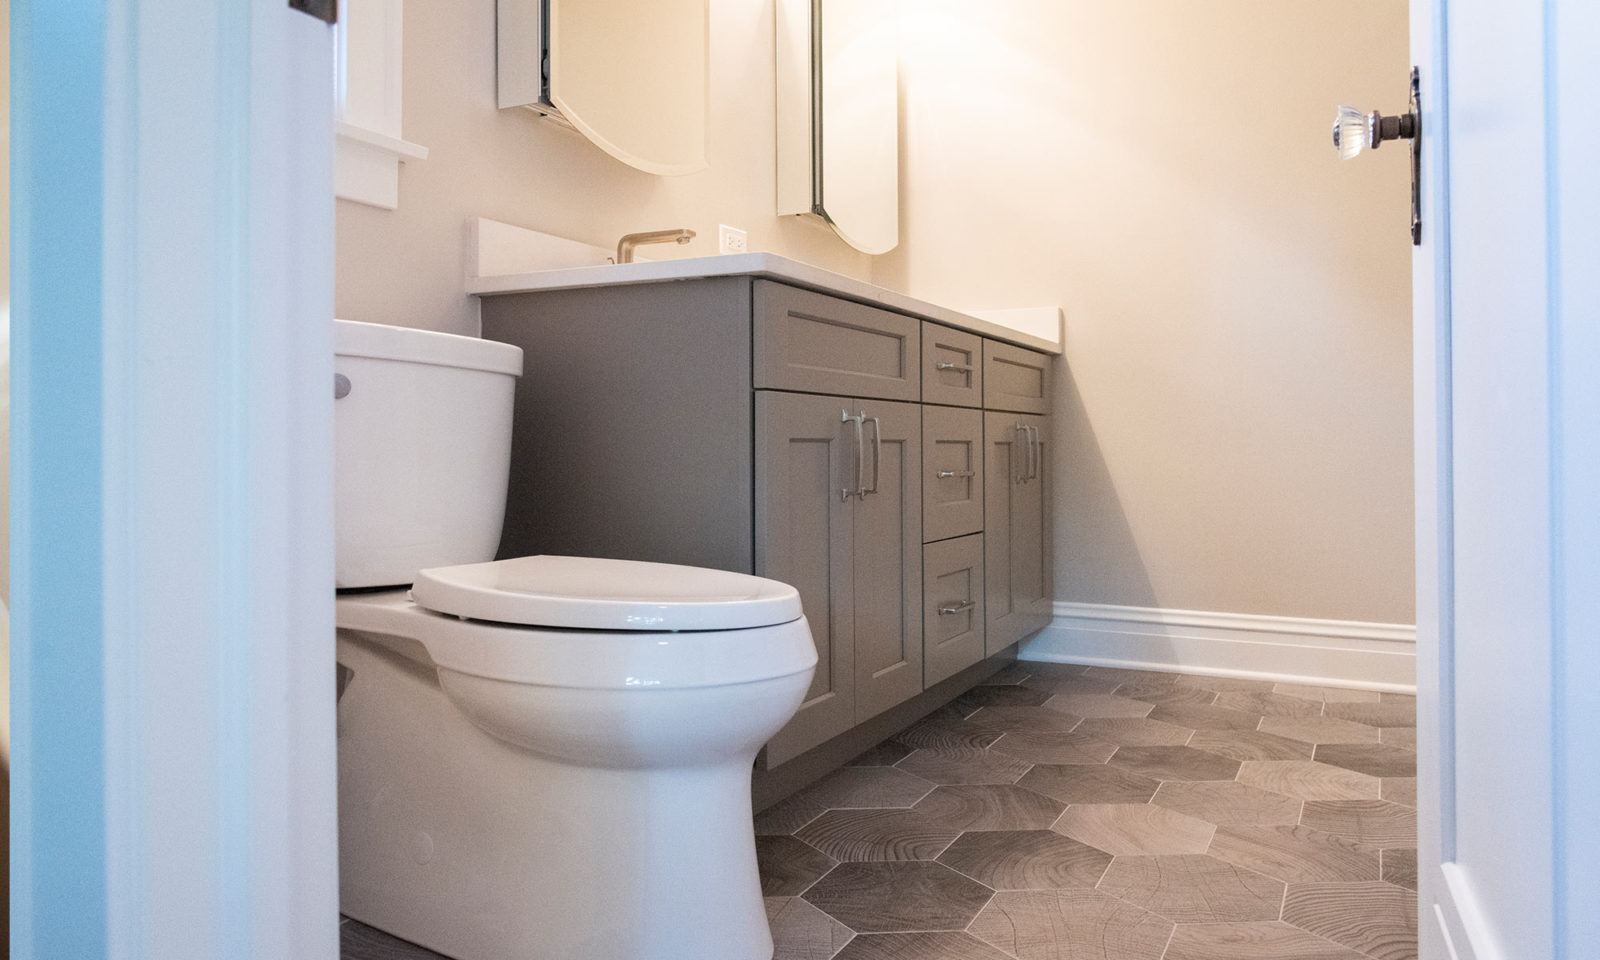 Newly renovated bathroom with gray honeycomb floor tiles and a statement gray sink cabinet